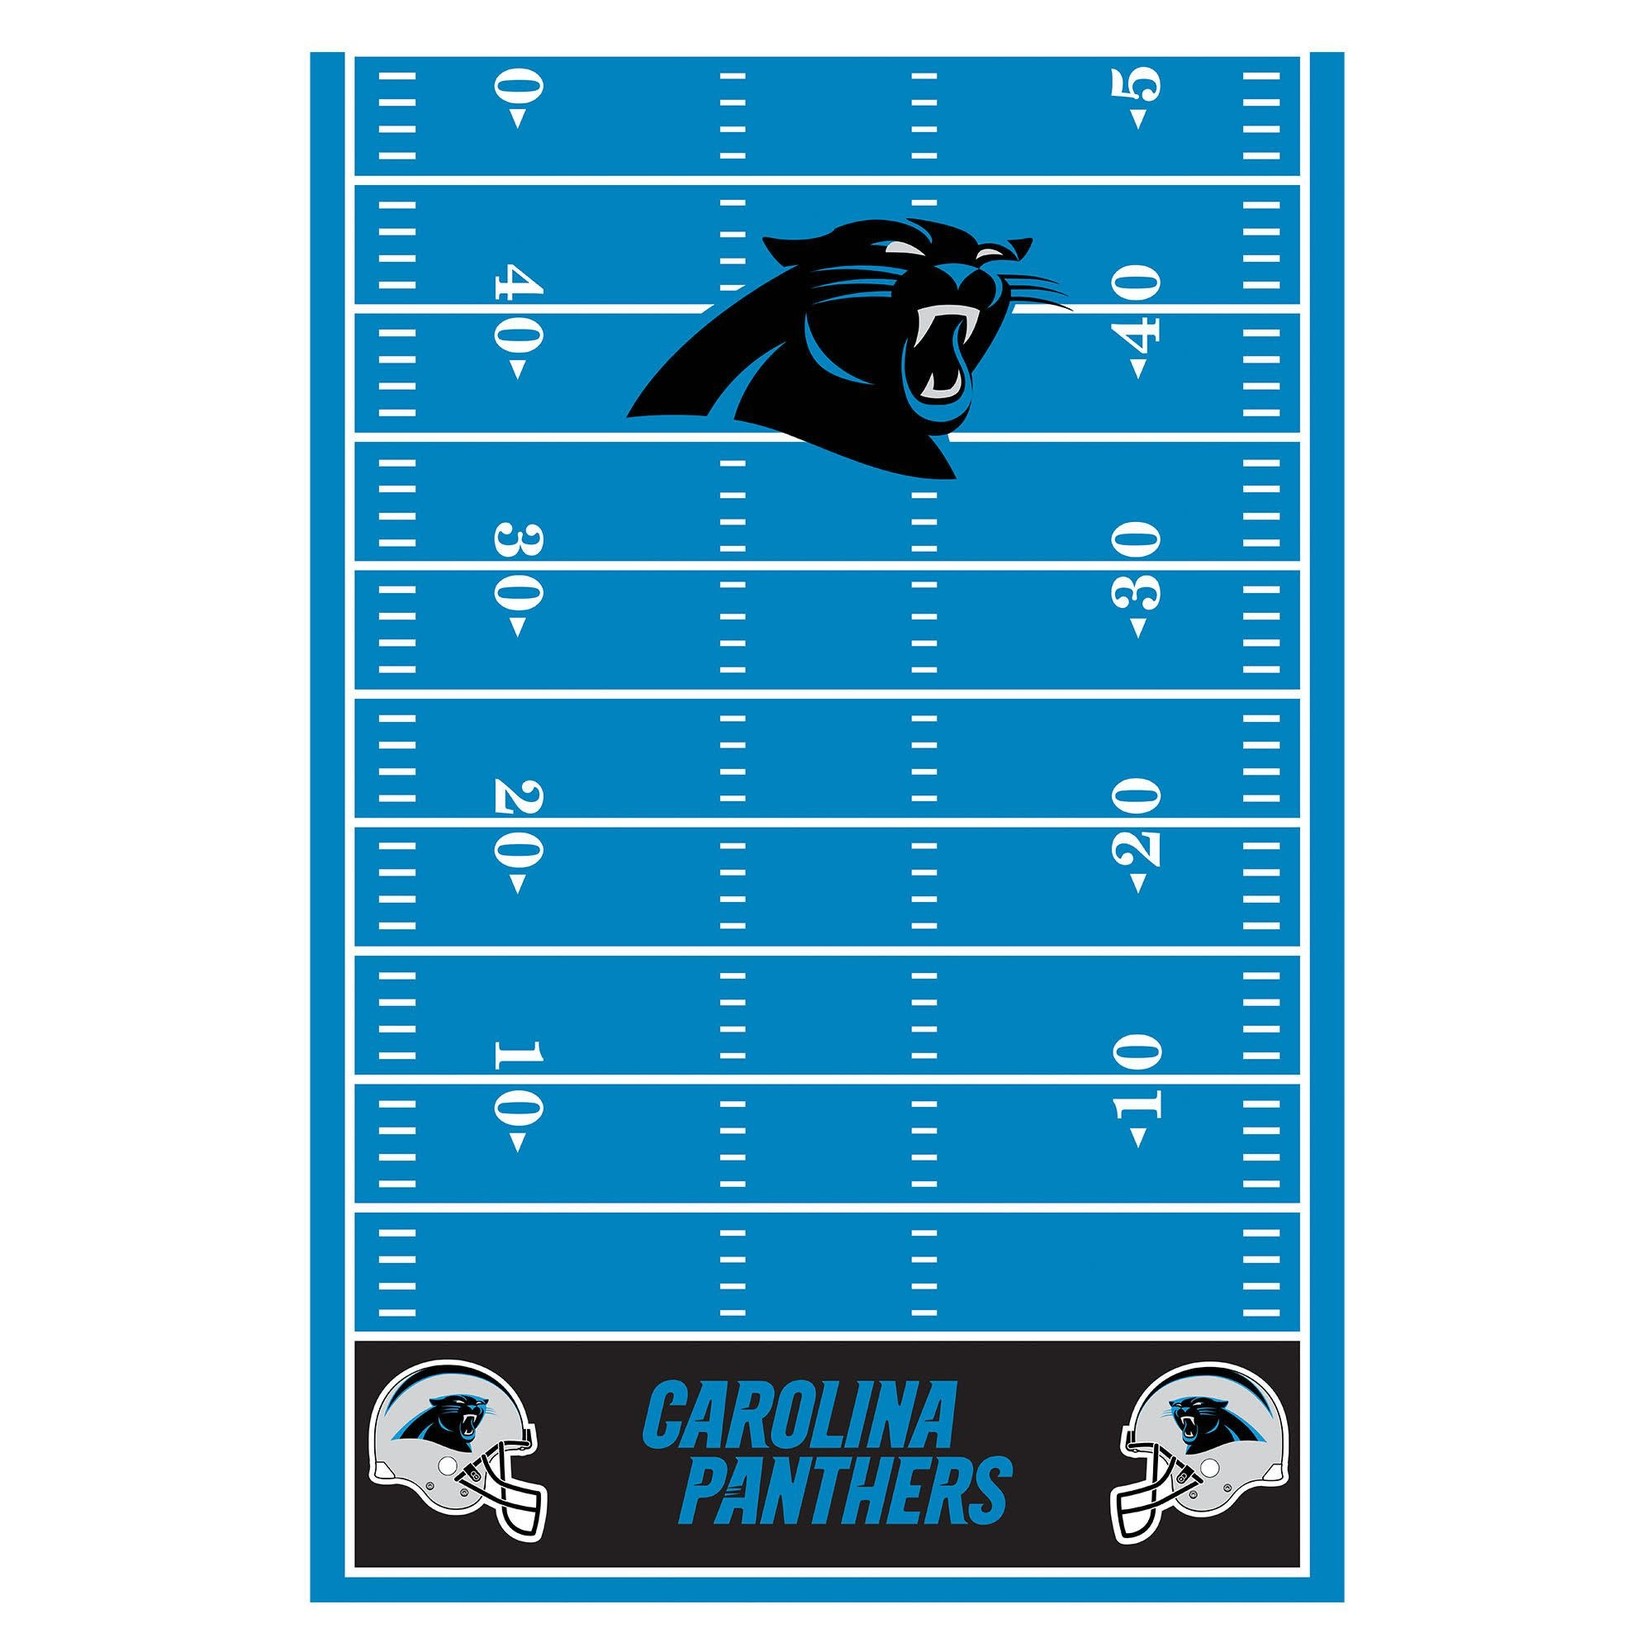 Carolina Panthers Plastic Table Cover - All Over Print